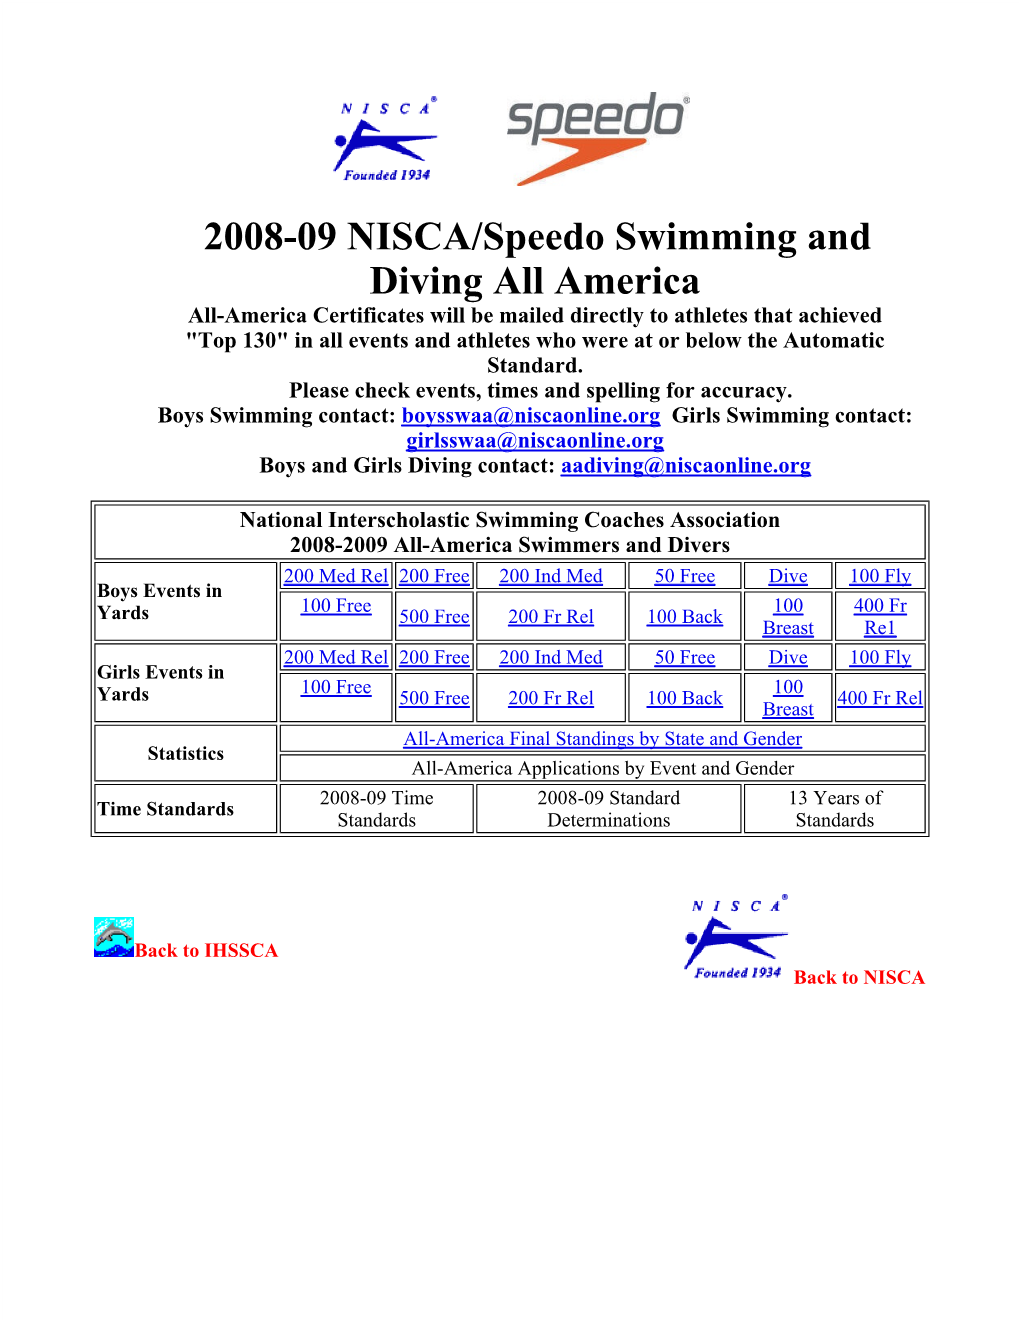 2008-09 NISCA/Speedo Swimming and Diving All America